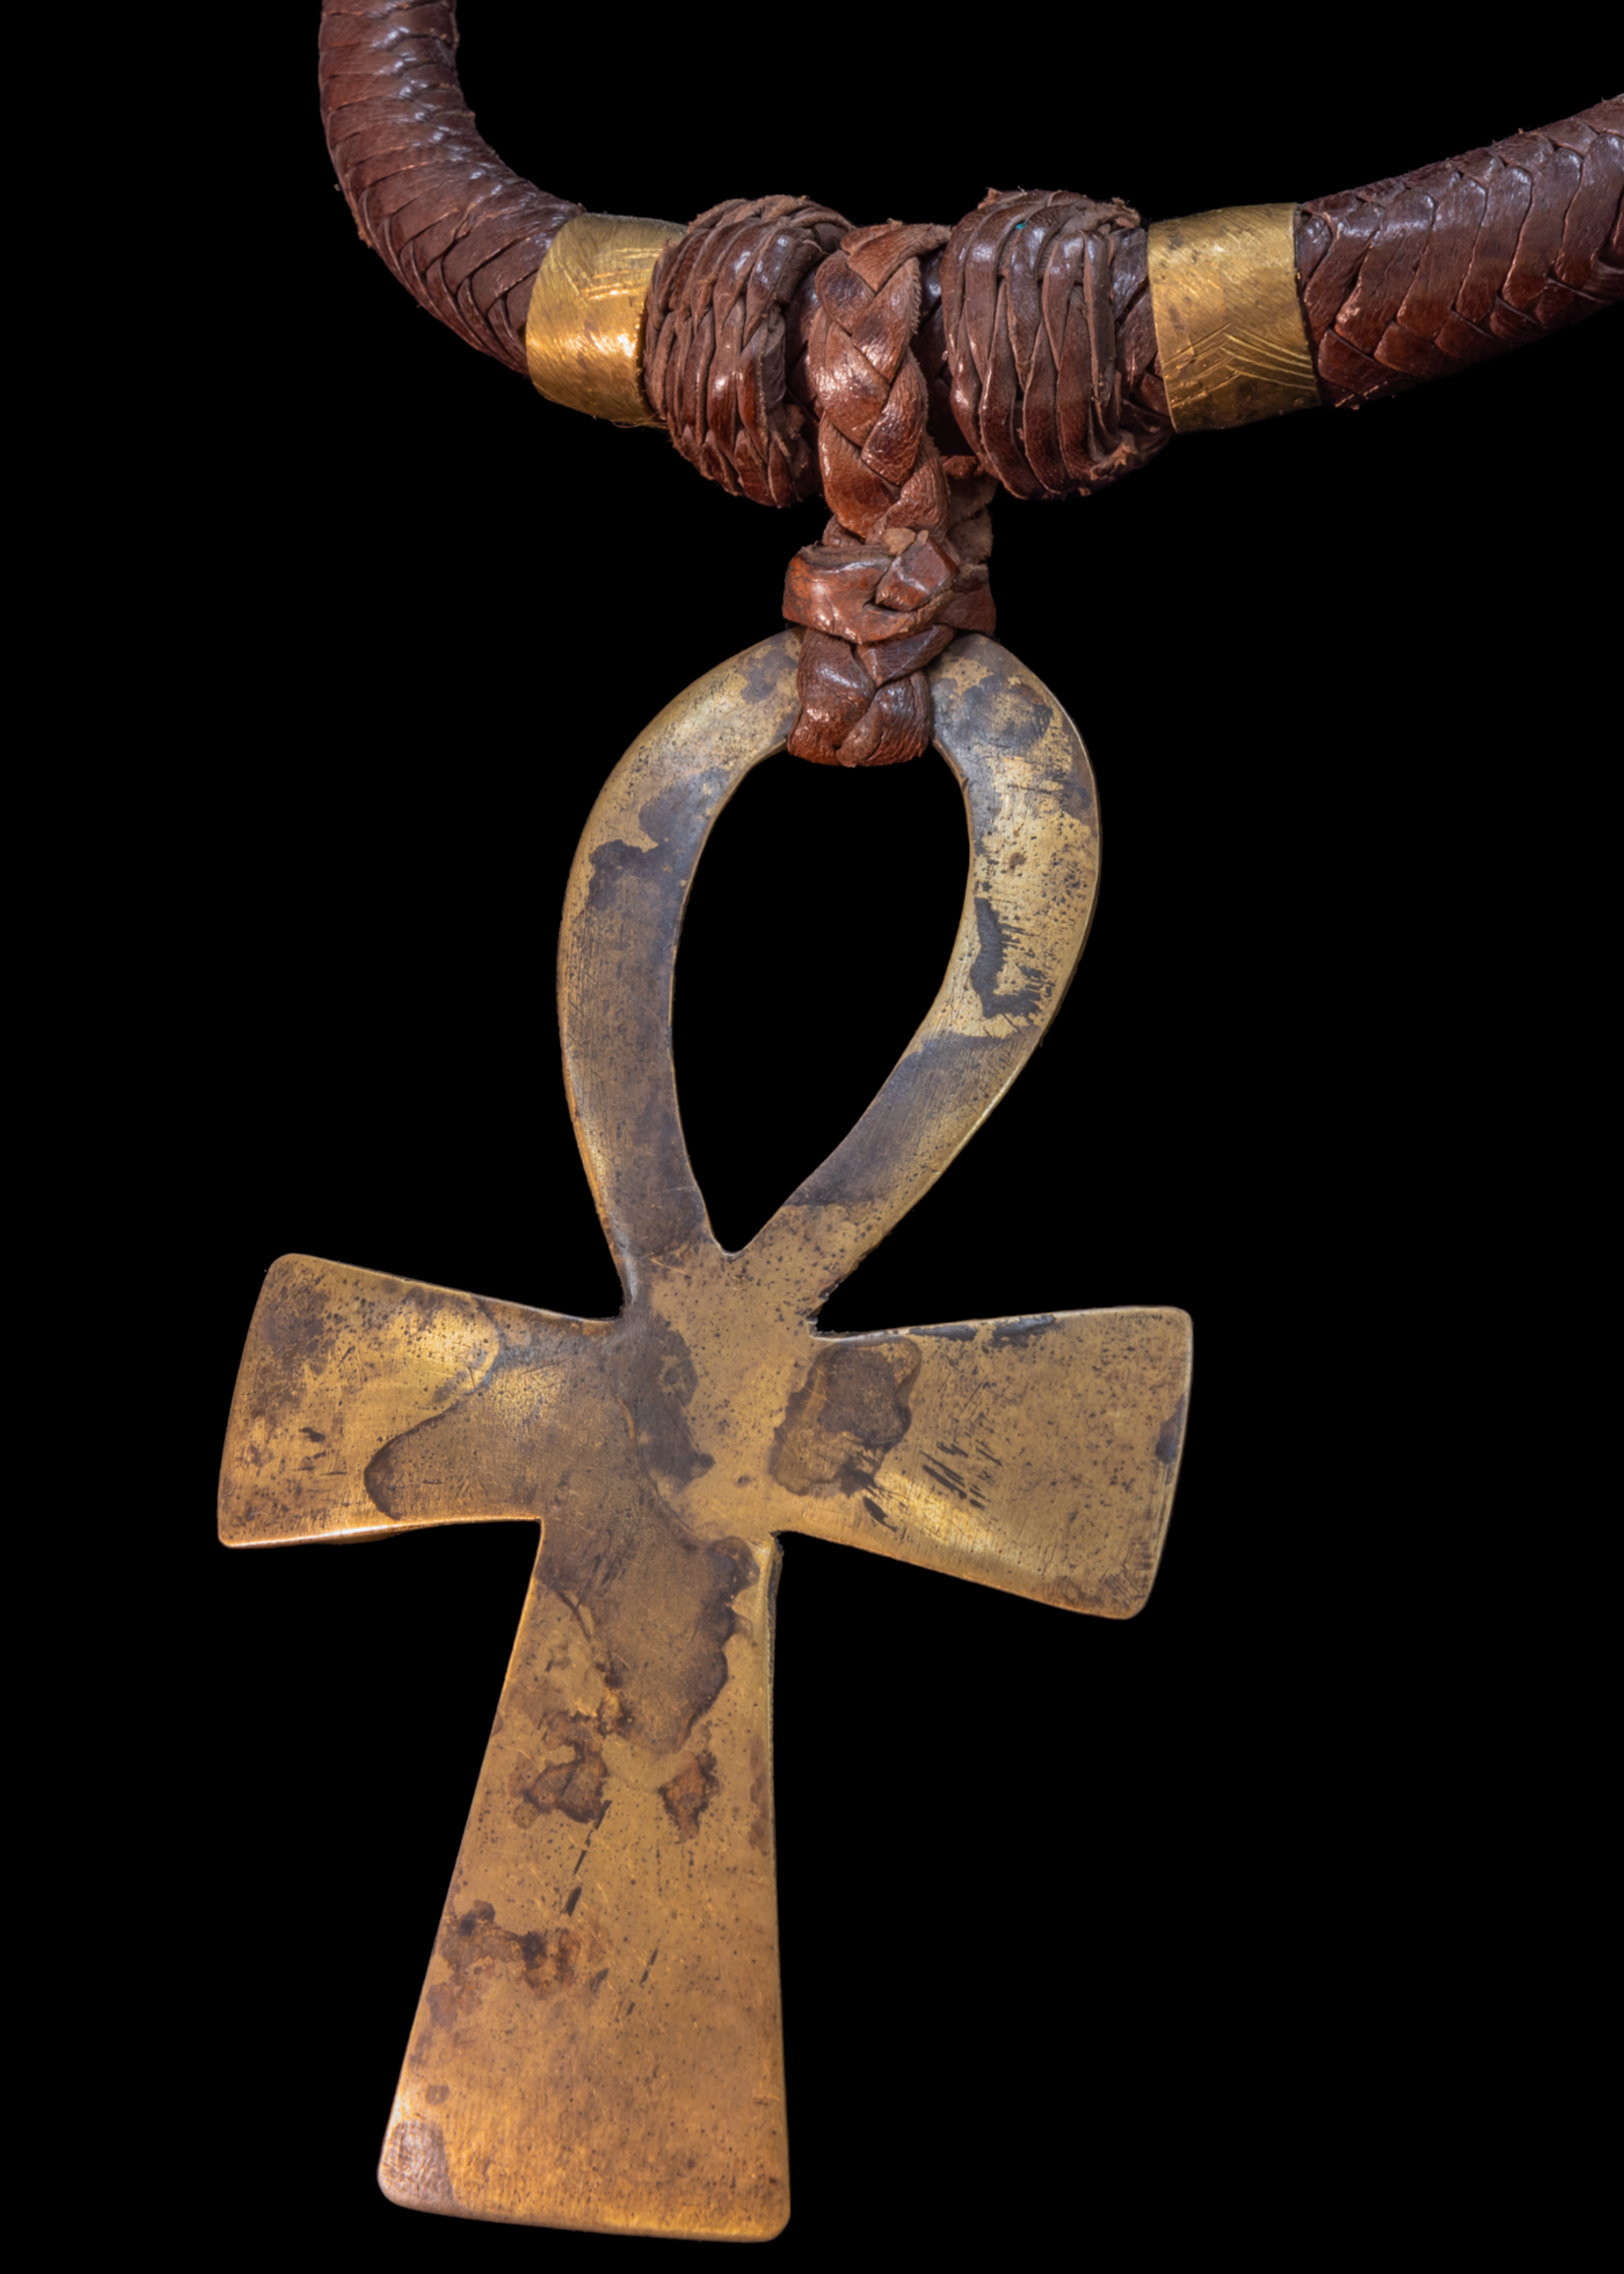 Mali Ethnic Necklace. Braided leather cord with large Ankh  brass pendant.